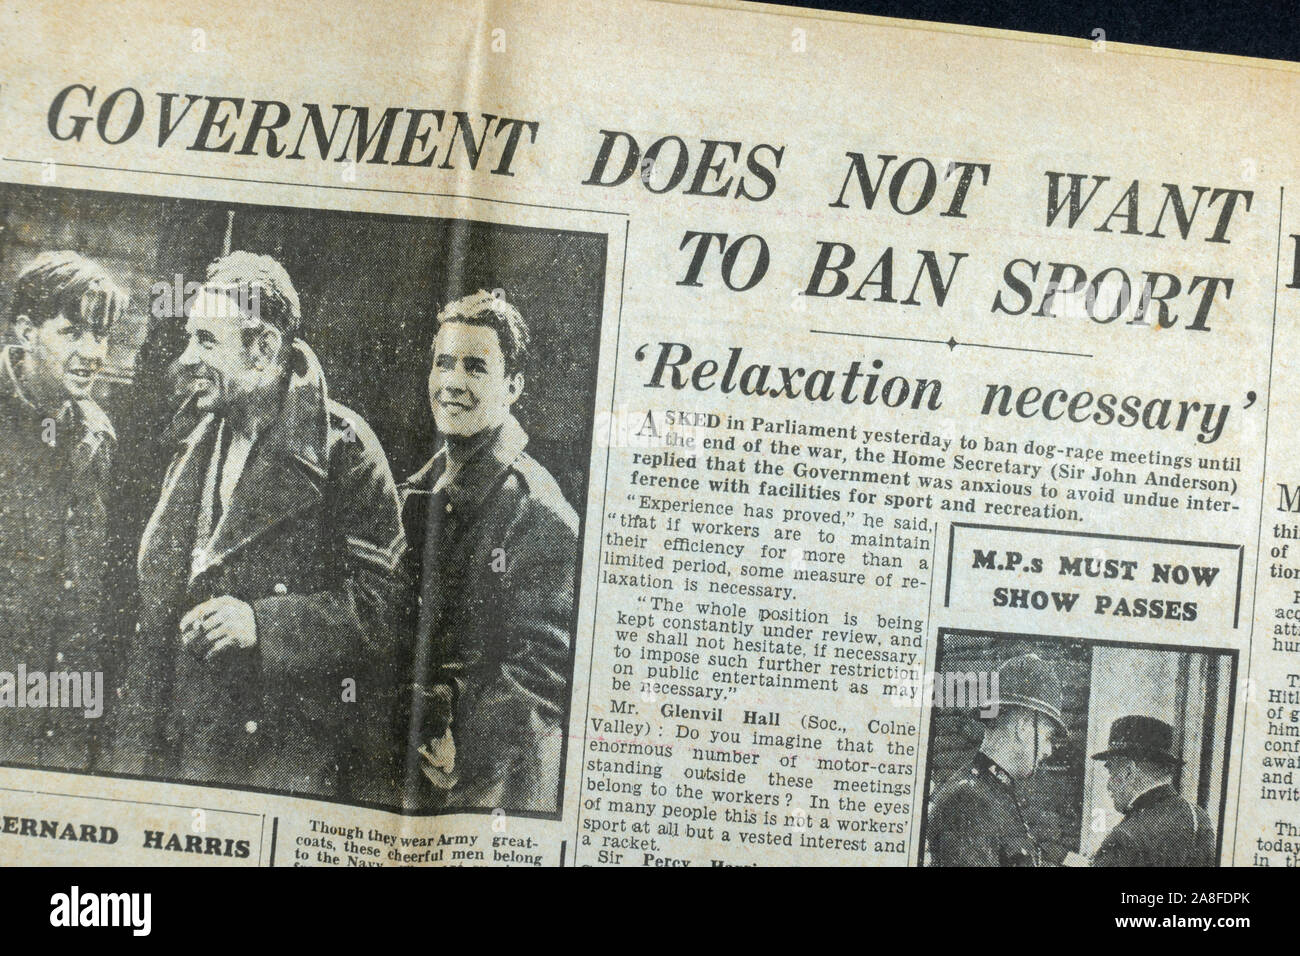 'Government does not want to ban sport' headline in the Daily Express newspaper (replica) on 31st May 1940 during the Dunkirk evacuation. Stock Photo